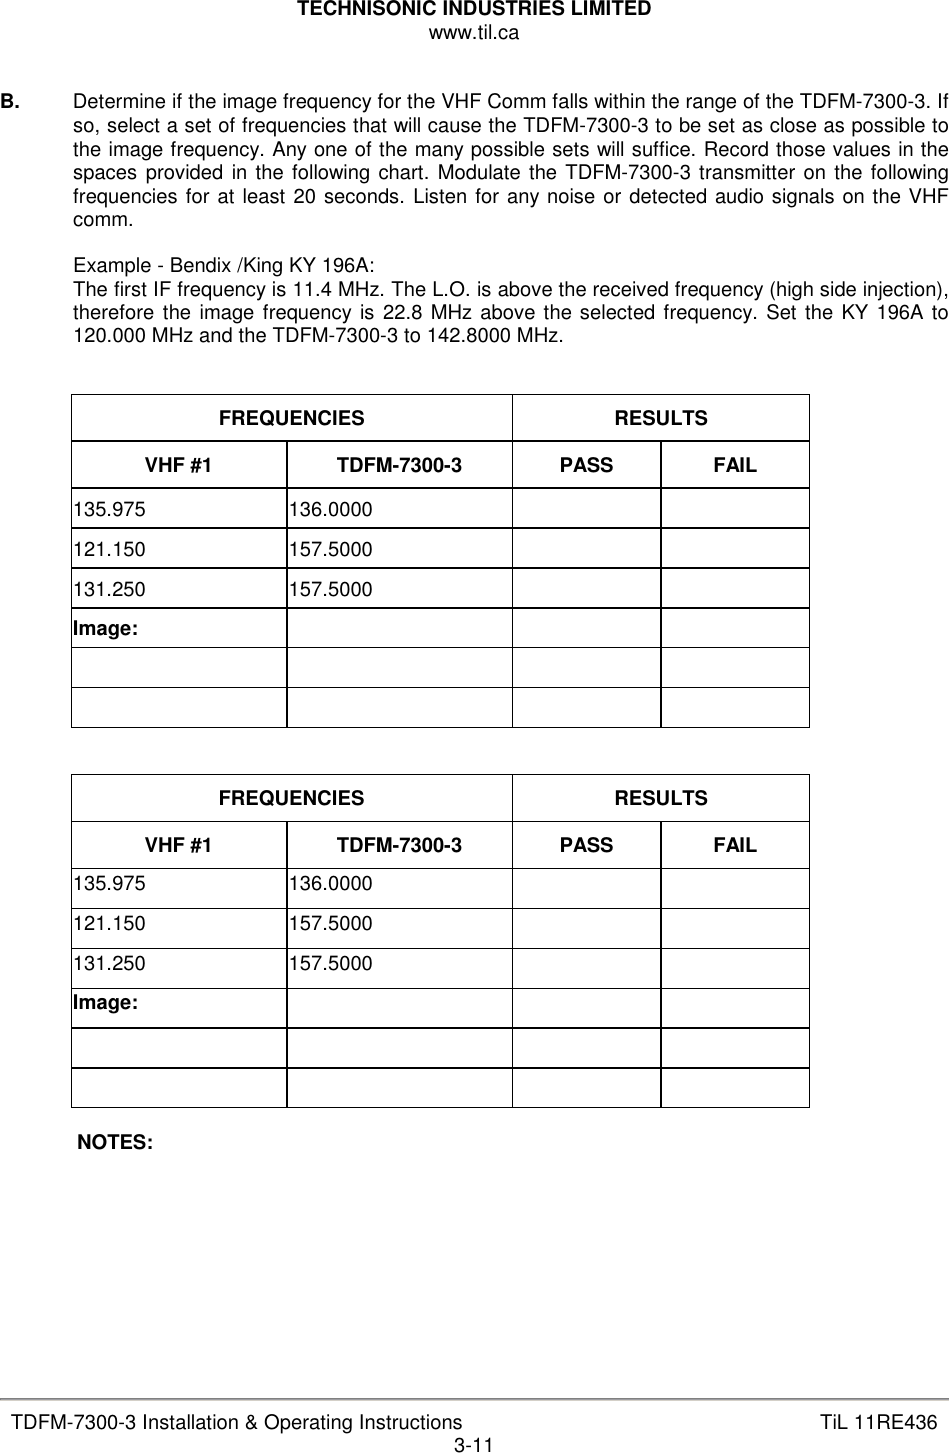 TECHNISONIC INDUSTRIES LIMITED www.til.ca   TDFM-7300-3 Installation &amp; Operating Instructions  TiL 11RE436 3-11  B.   Determine if the image frequency for the VHF Comm falls within the range of the TDFM-7300-3. If so, select a set of frequencies that will cause the TDFM-7300-3 to be set as close as possible to the image frequency. Any one of the many possible sets will suffice. Record those values in the spaces  provided  in the following chart. Modulate the TDFM-7300-3 transmitter on the following frequencies for at least 20 seconds. Listen for any noise or detected audio signals on the VHF comm.  Example - Bendix /King KY 196A: The first IF frequency is 11.4 MHz. The L.O. is above the received frequency (high side injection), therefore  the image frequency is 22.8 MHz above the selected frequency. Set the KY 196A to 120.000 MHz and the TDFM-7300-3 to 142.8000 MHz.   FREQUENCIES  RESULTS VHF #1  TDFM-7300-3  PASS  FAIL 135.975  136.0000     121.150  157.5000     131.250  157.5000     Image:                      FREQUENCIES  RESULTS VHF #1  TDFM-7300-3  PASS  FAIL 135.975  136.0000     121.150  157.5000     131.250  157.5000     Image:                     NOTES:        